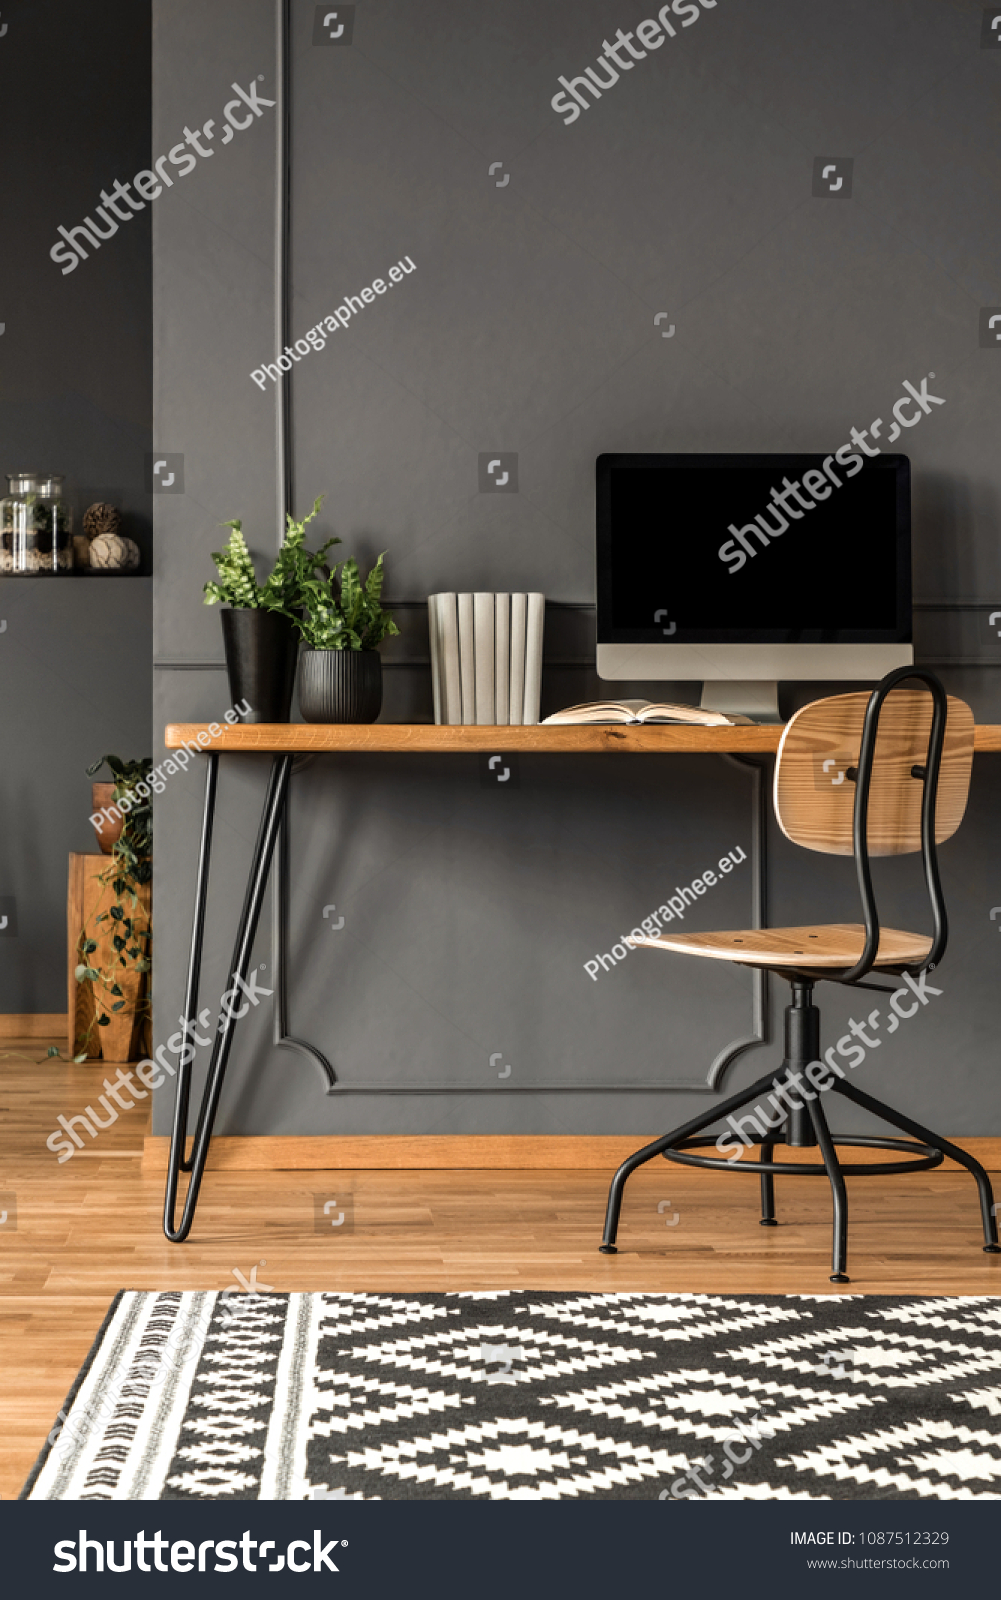 Patterned carpet in grey scandi workspace interior with computer monitor on wooden desk #1087512329